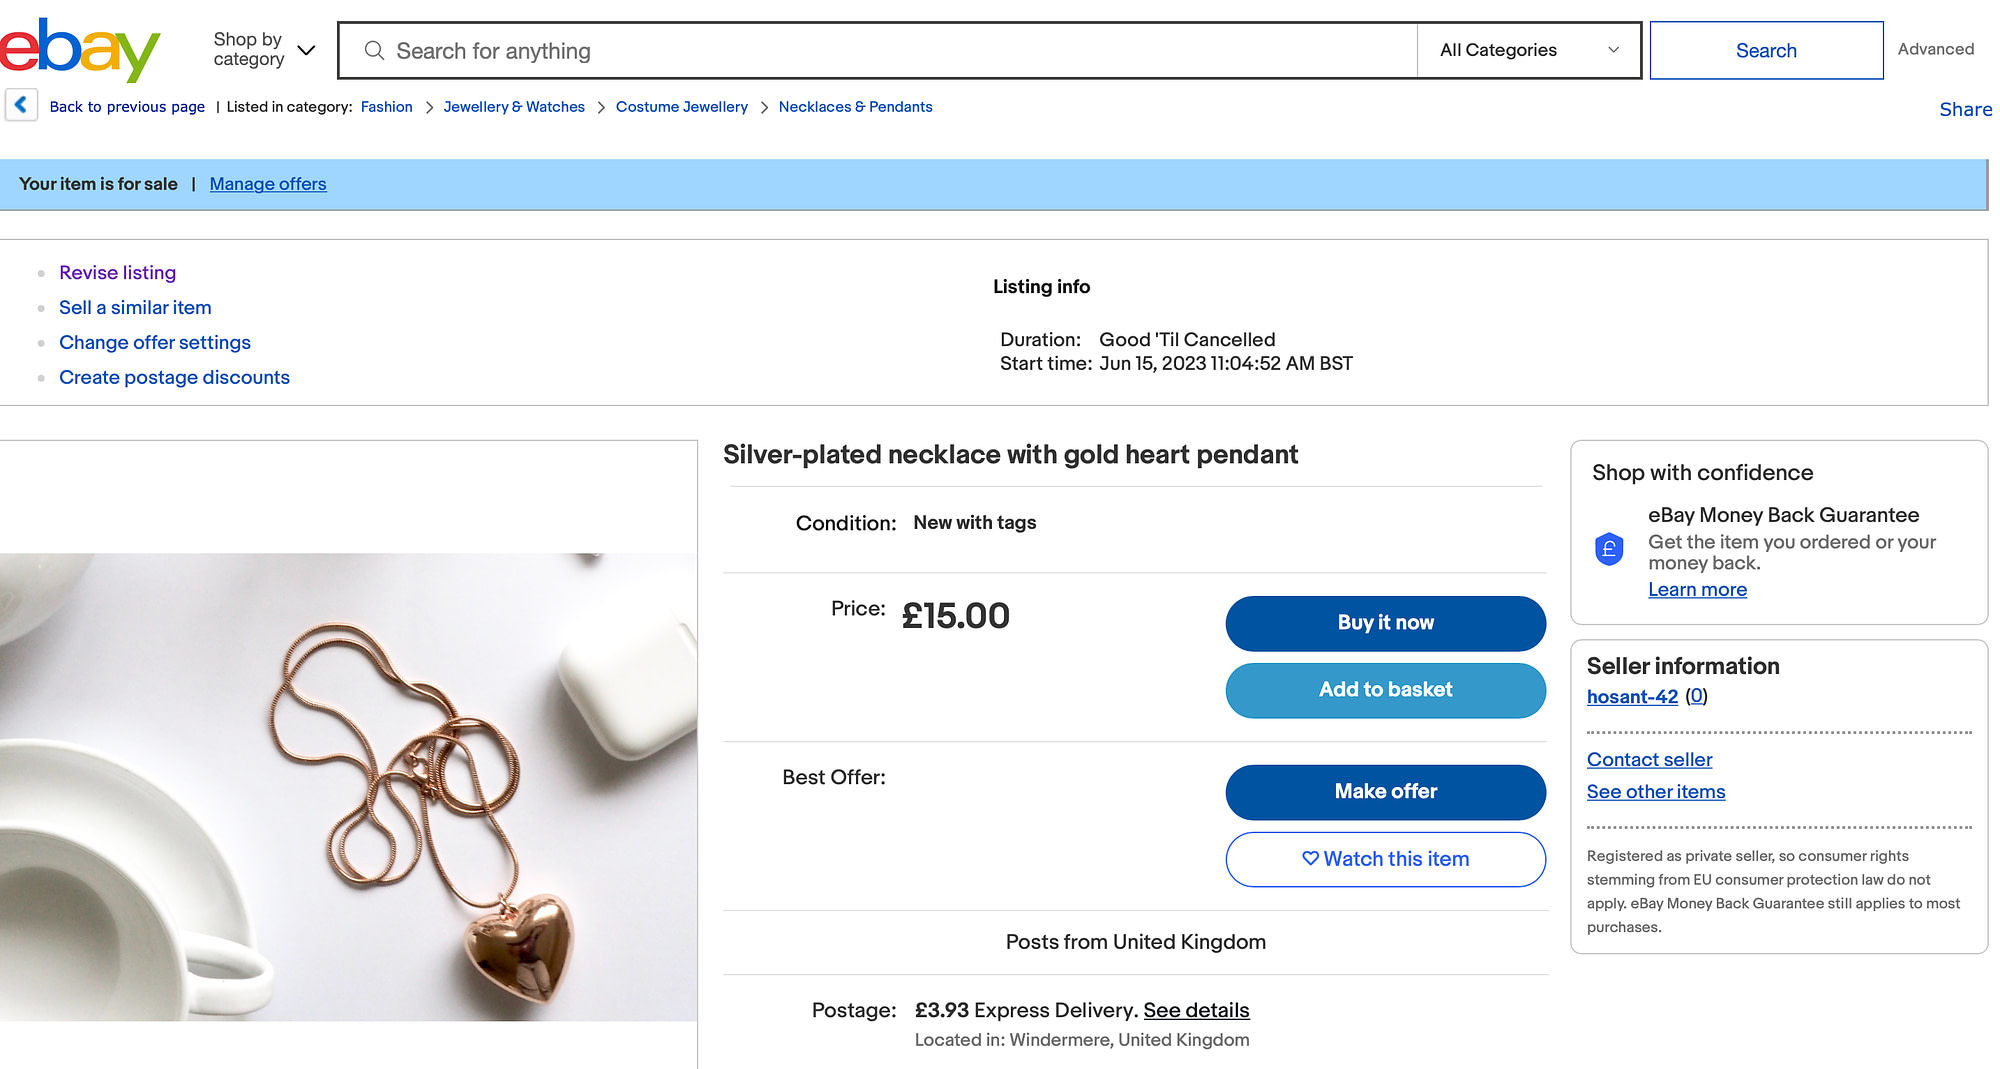 eBay listing example of a necklace listed for 15 pounds.